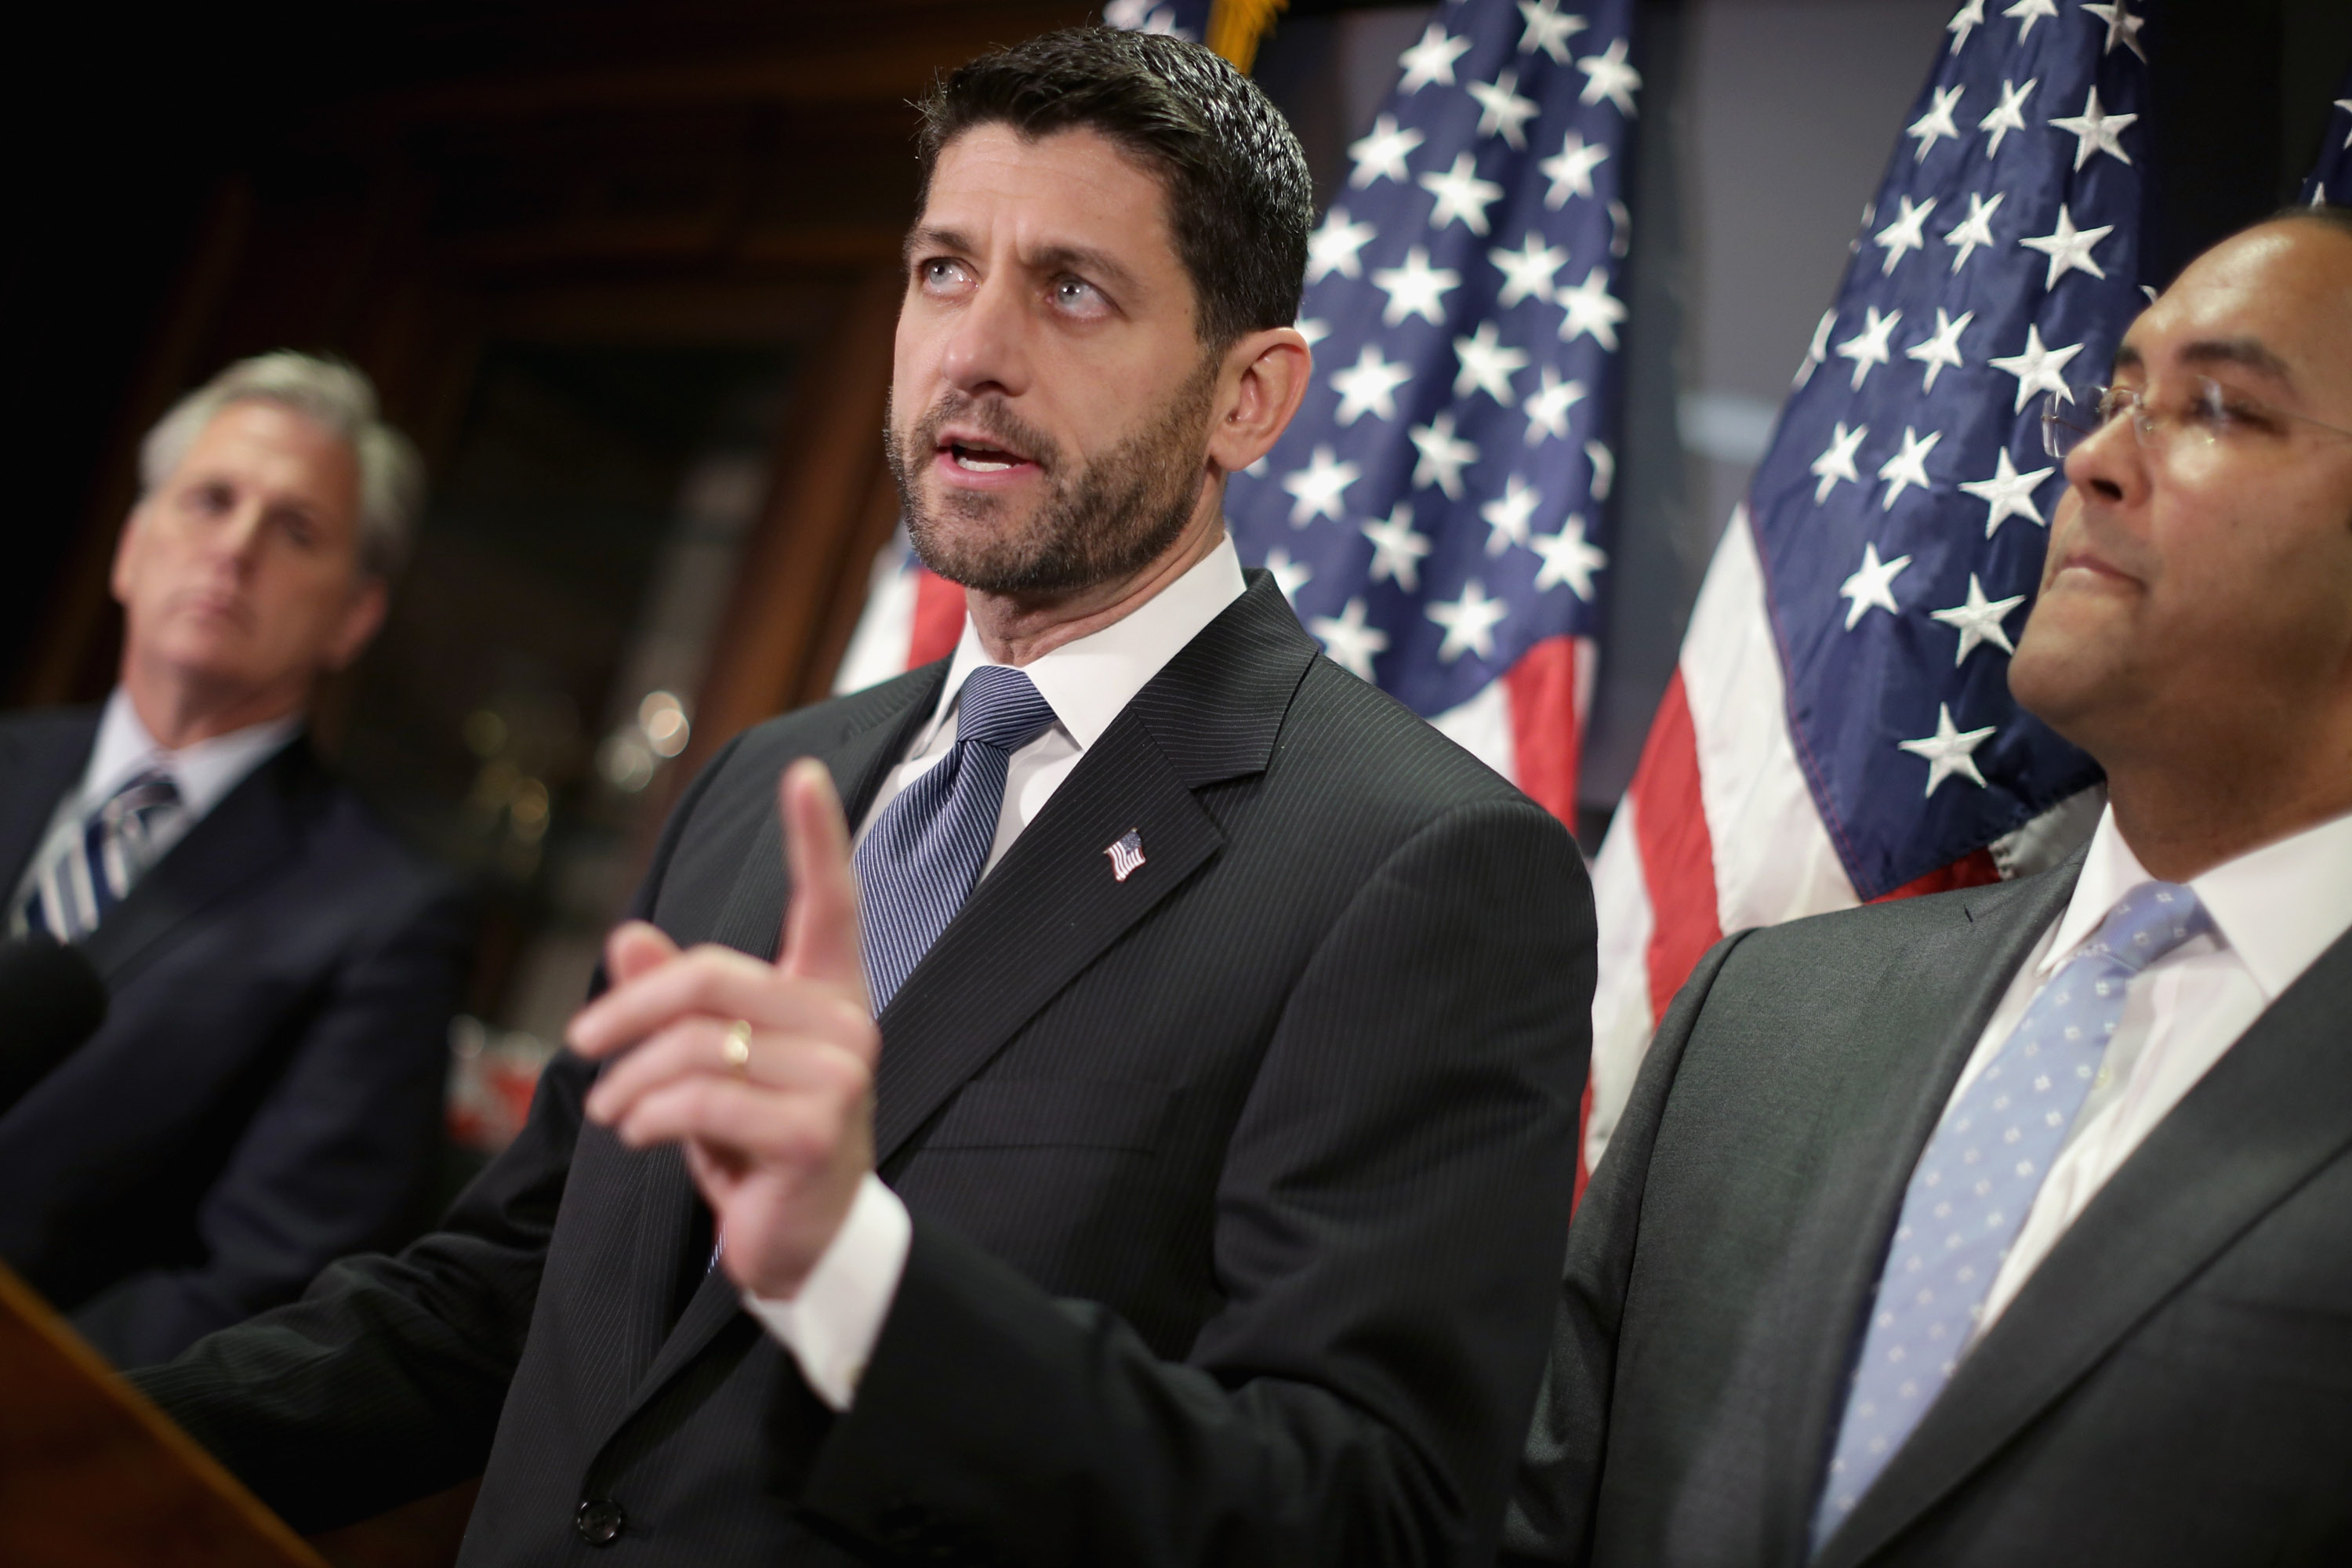 Speaker of the House Paul Ryan, R-WI, and members of the House GOP leadership, including Majority Leader Kevin McCarthy, R-CA, and Rep. Will Hurd, R-TX, hold a news briefing. (Getty)